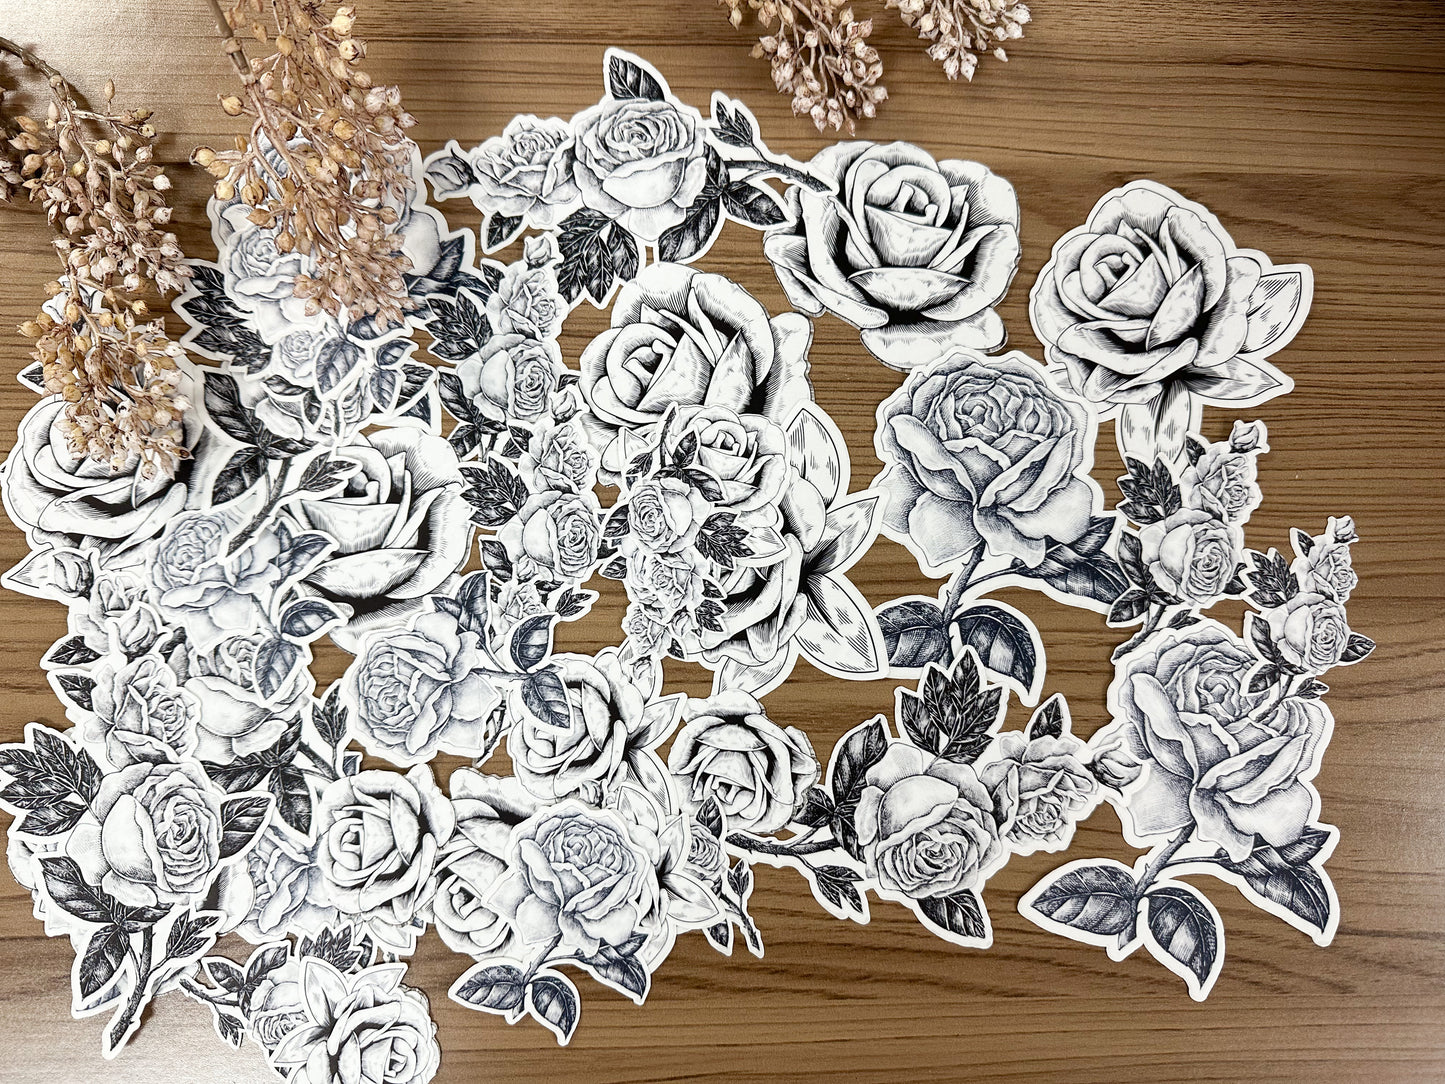 Reproduction Stickers- Black and White